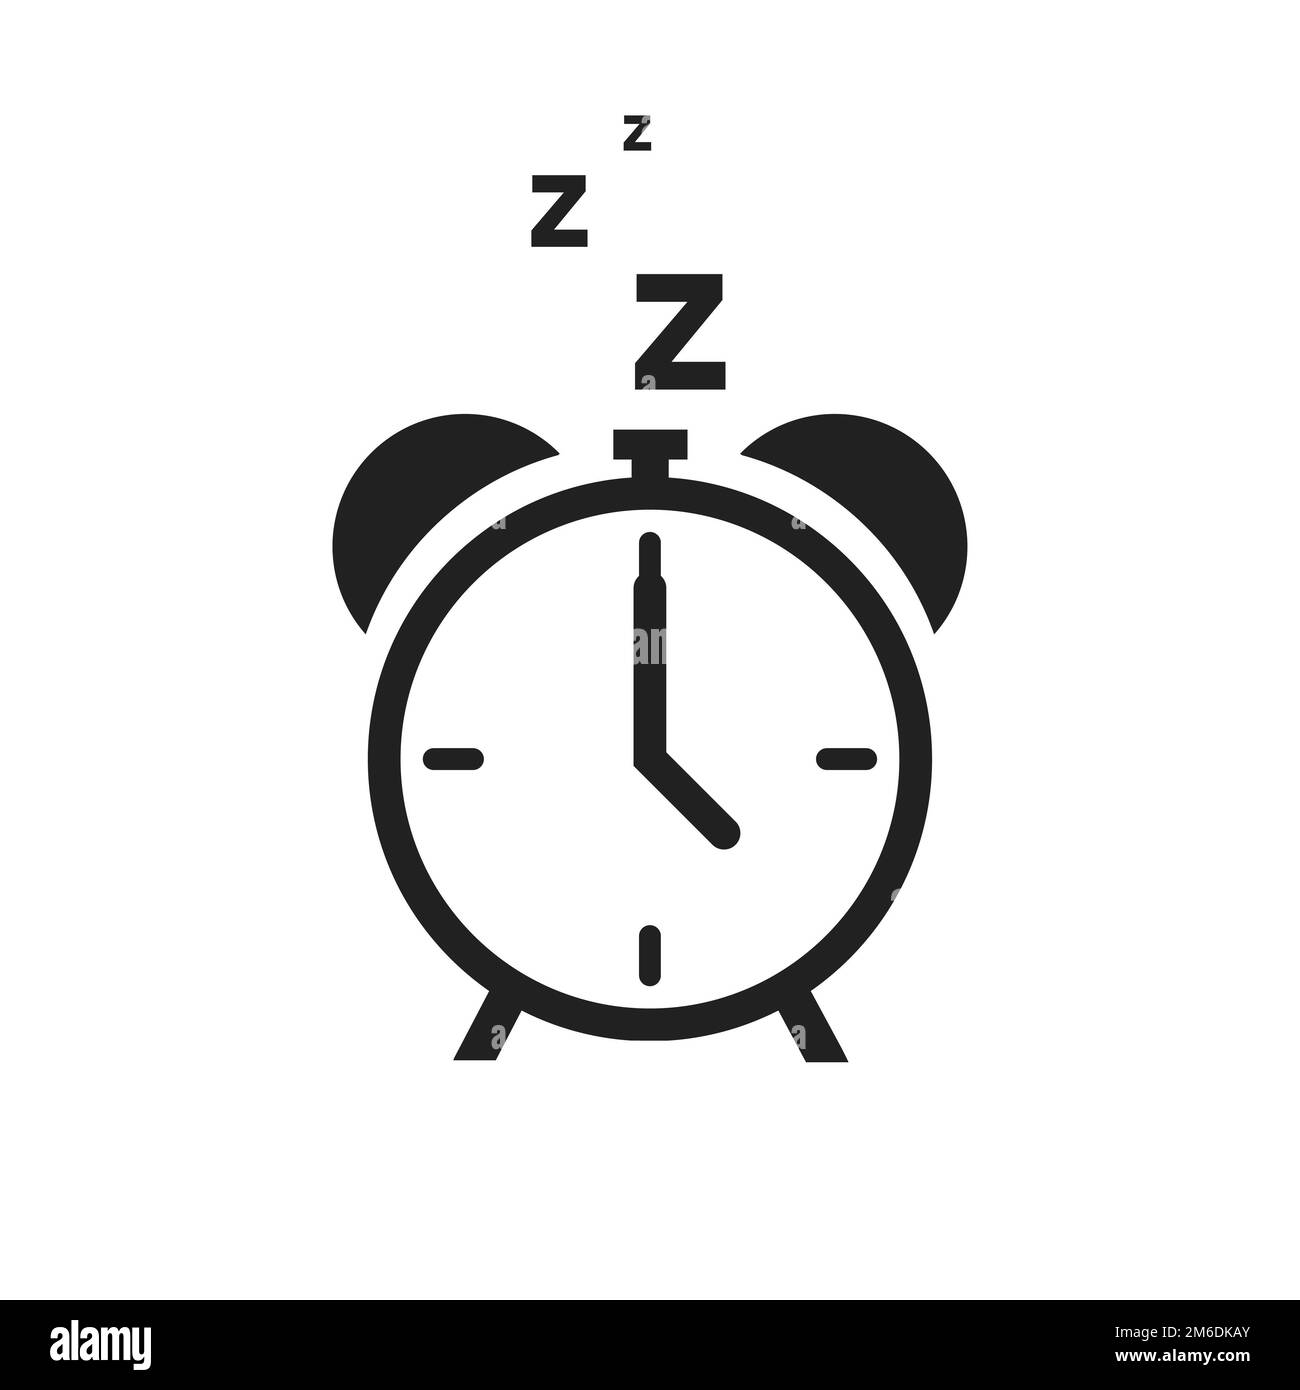 Yellow Ringing Alarm Clock Icon Isolated On White Background Wake Up Time  Desk Clock Vector Illustration In Flat Style Element For Your Design Stock  Illustration - Download Image Now - iStock